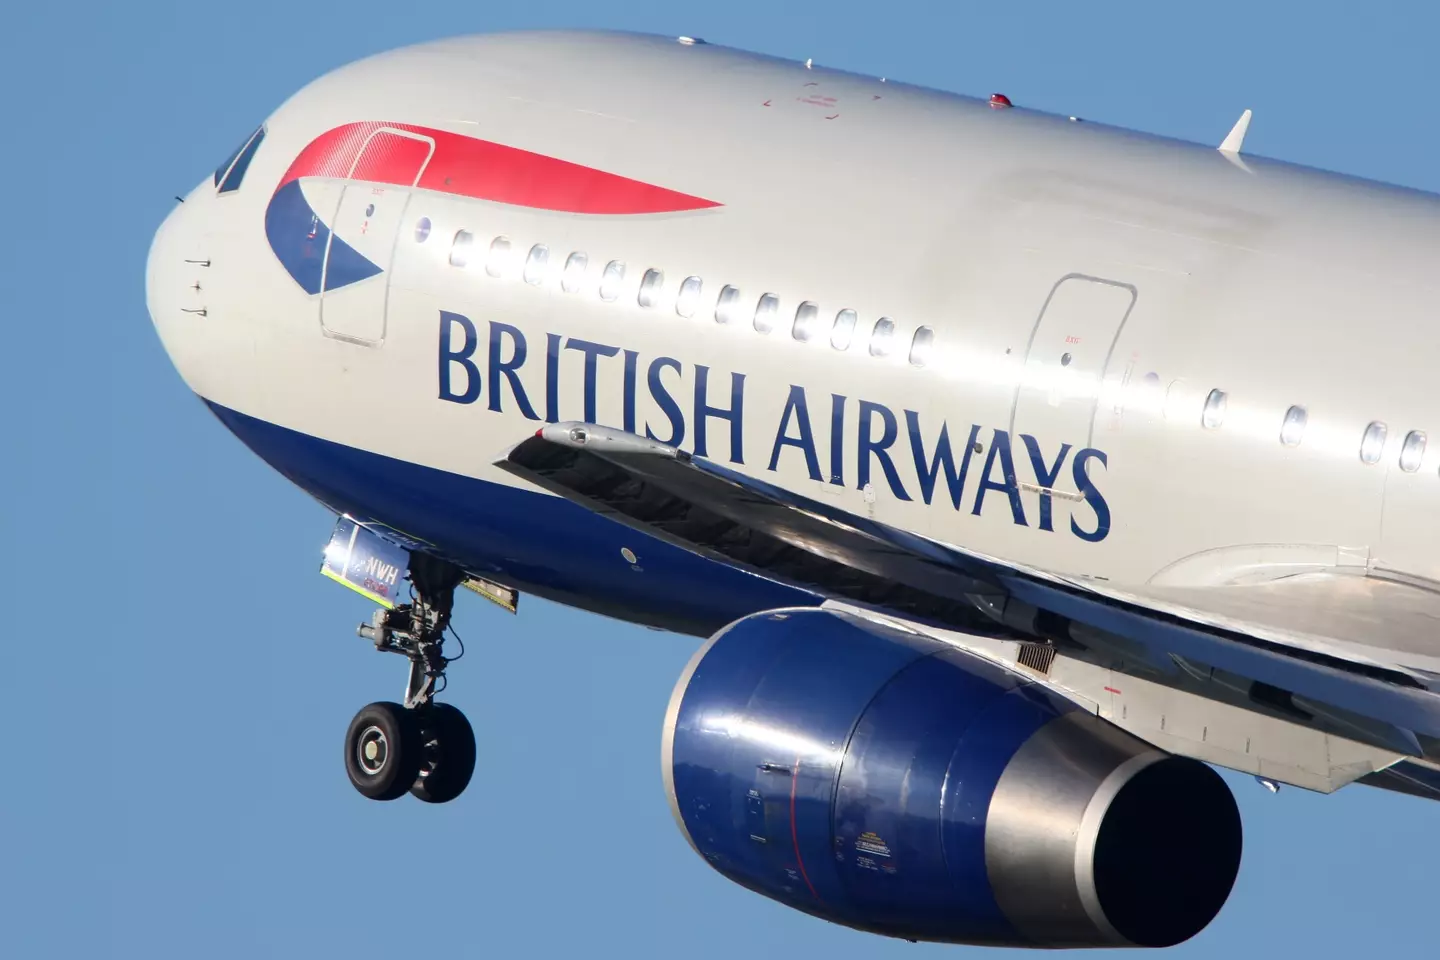 British Airways has been forced to issue an apology.